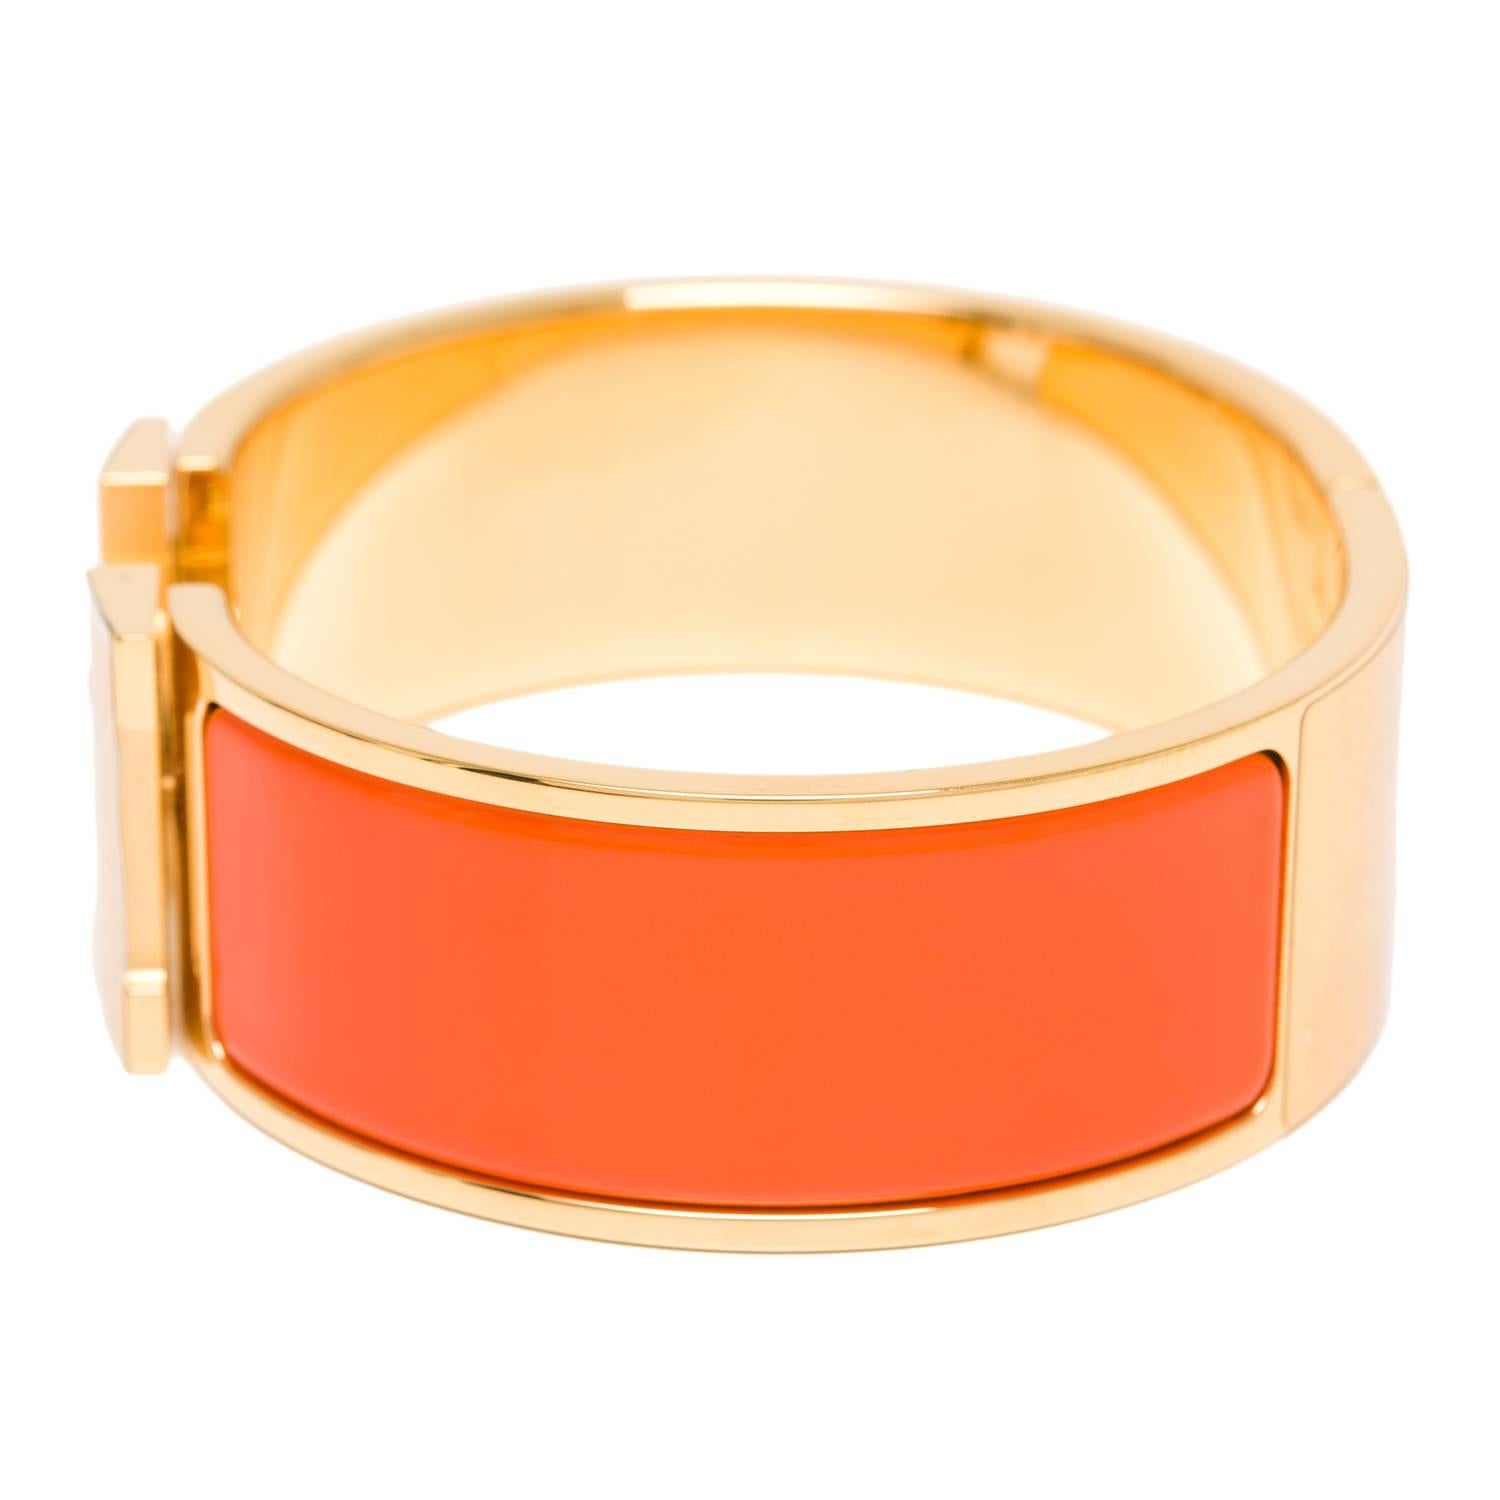 Hermes wide Clic Clac H bracelet in Orange enamel with gold plated hardware in size PM.

Origin: France

Condition: Pristine; store fresh

Accompanied by: Hermes box, dustbag, carebook and ribbon

Measurements: Diameter: 2.25